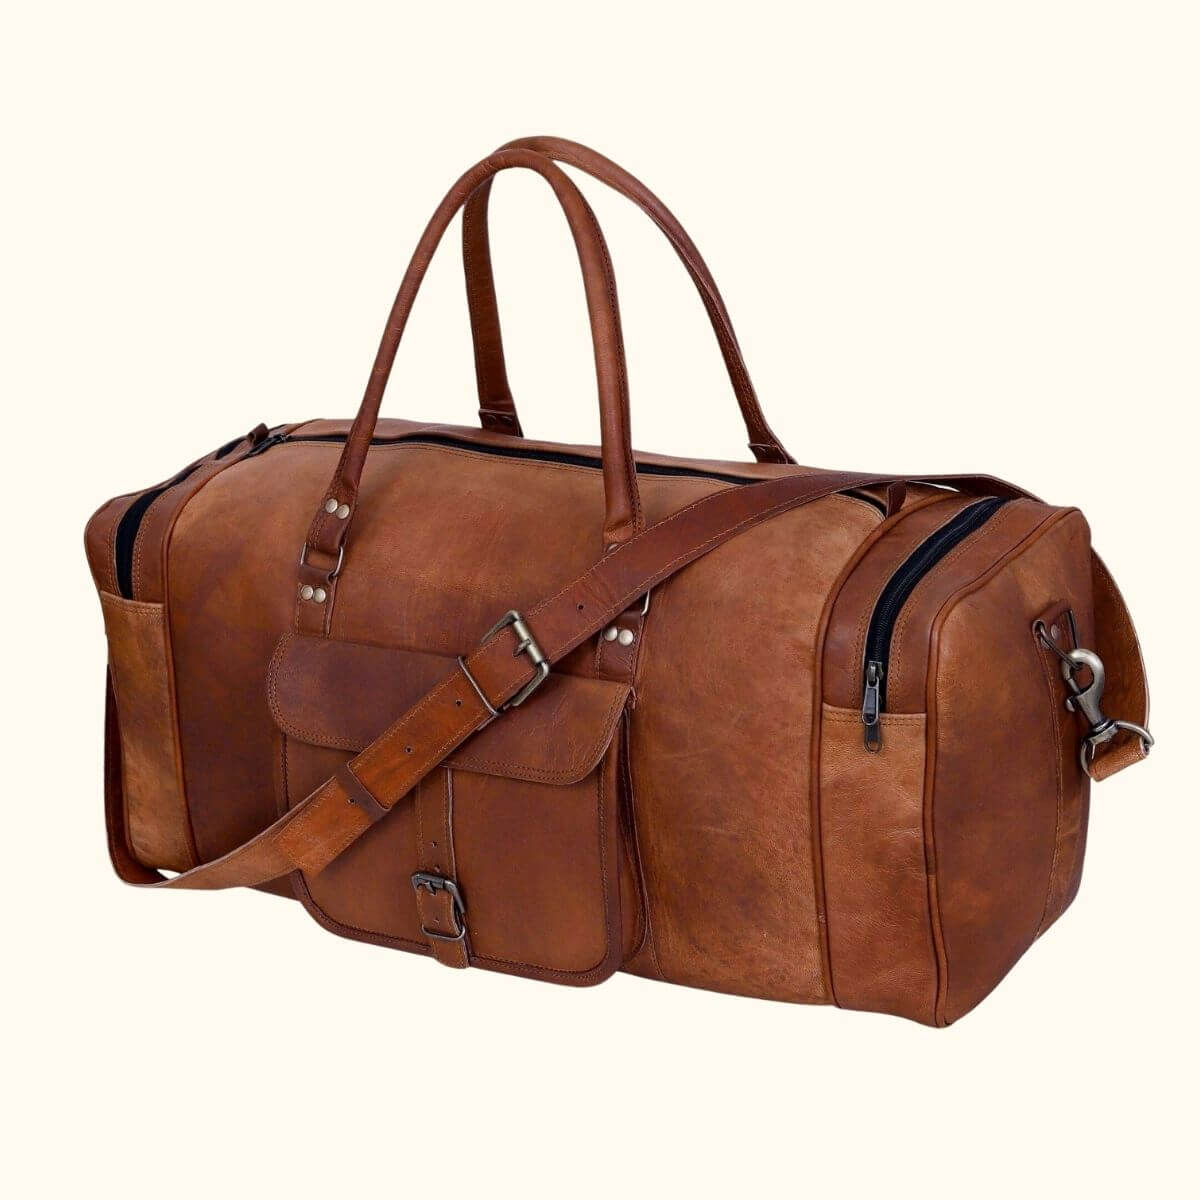 The Wishing Well - Square Leather Duffel Bag | Western Leather Bag ...